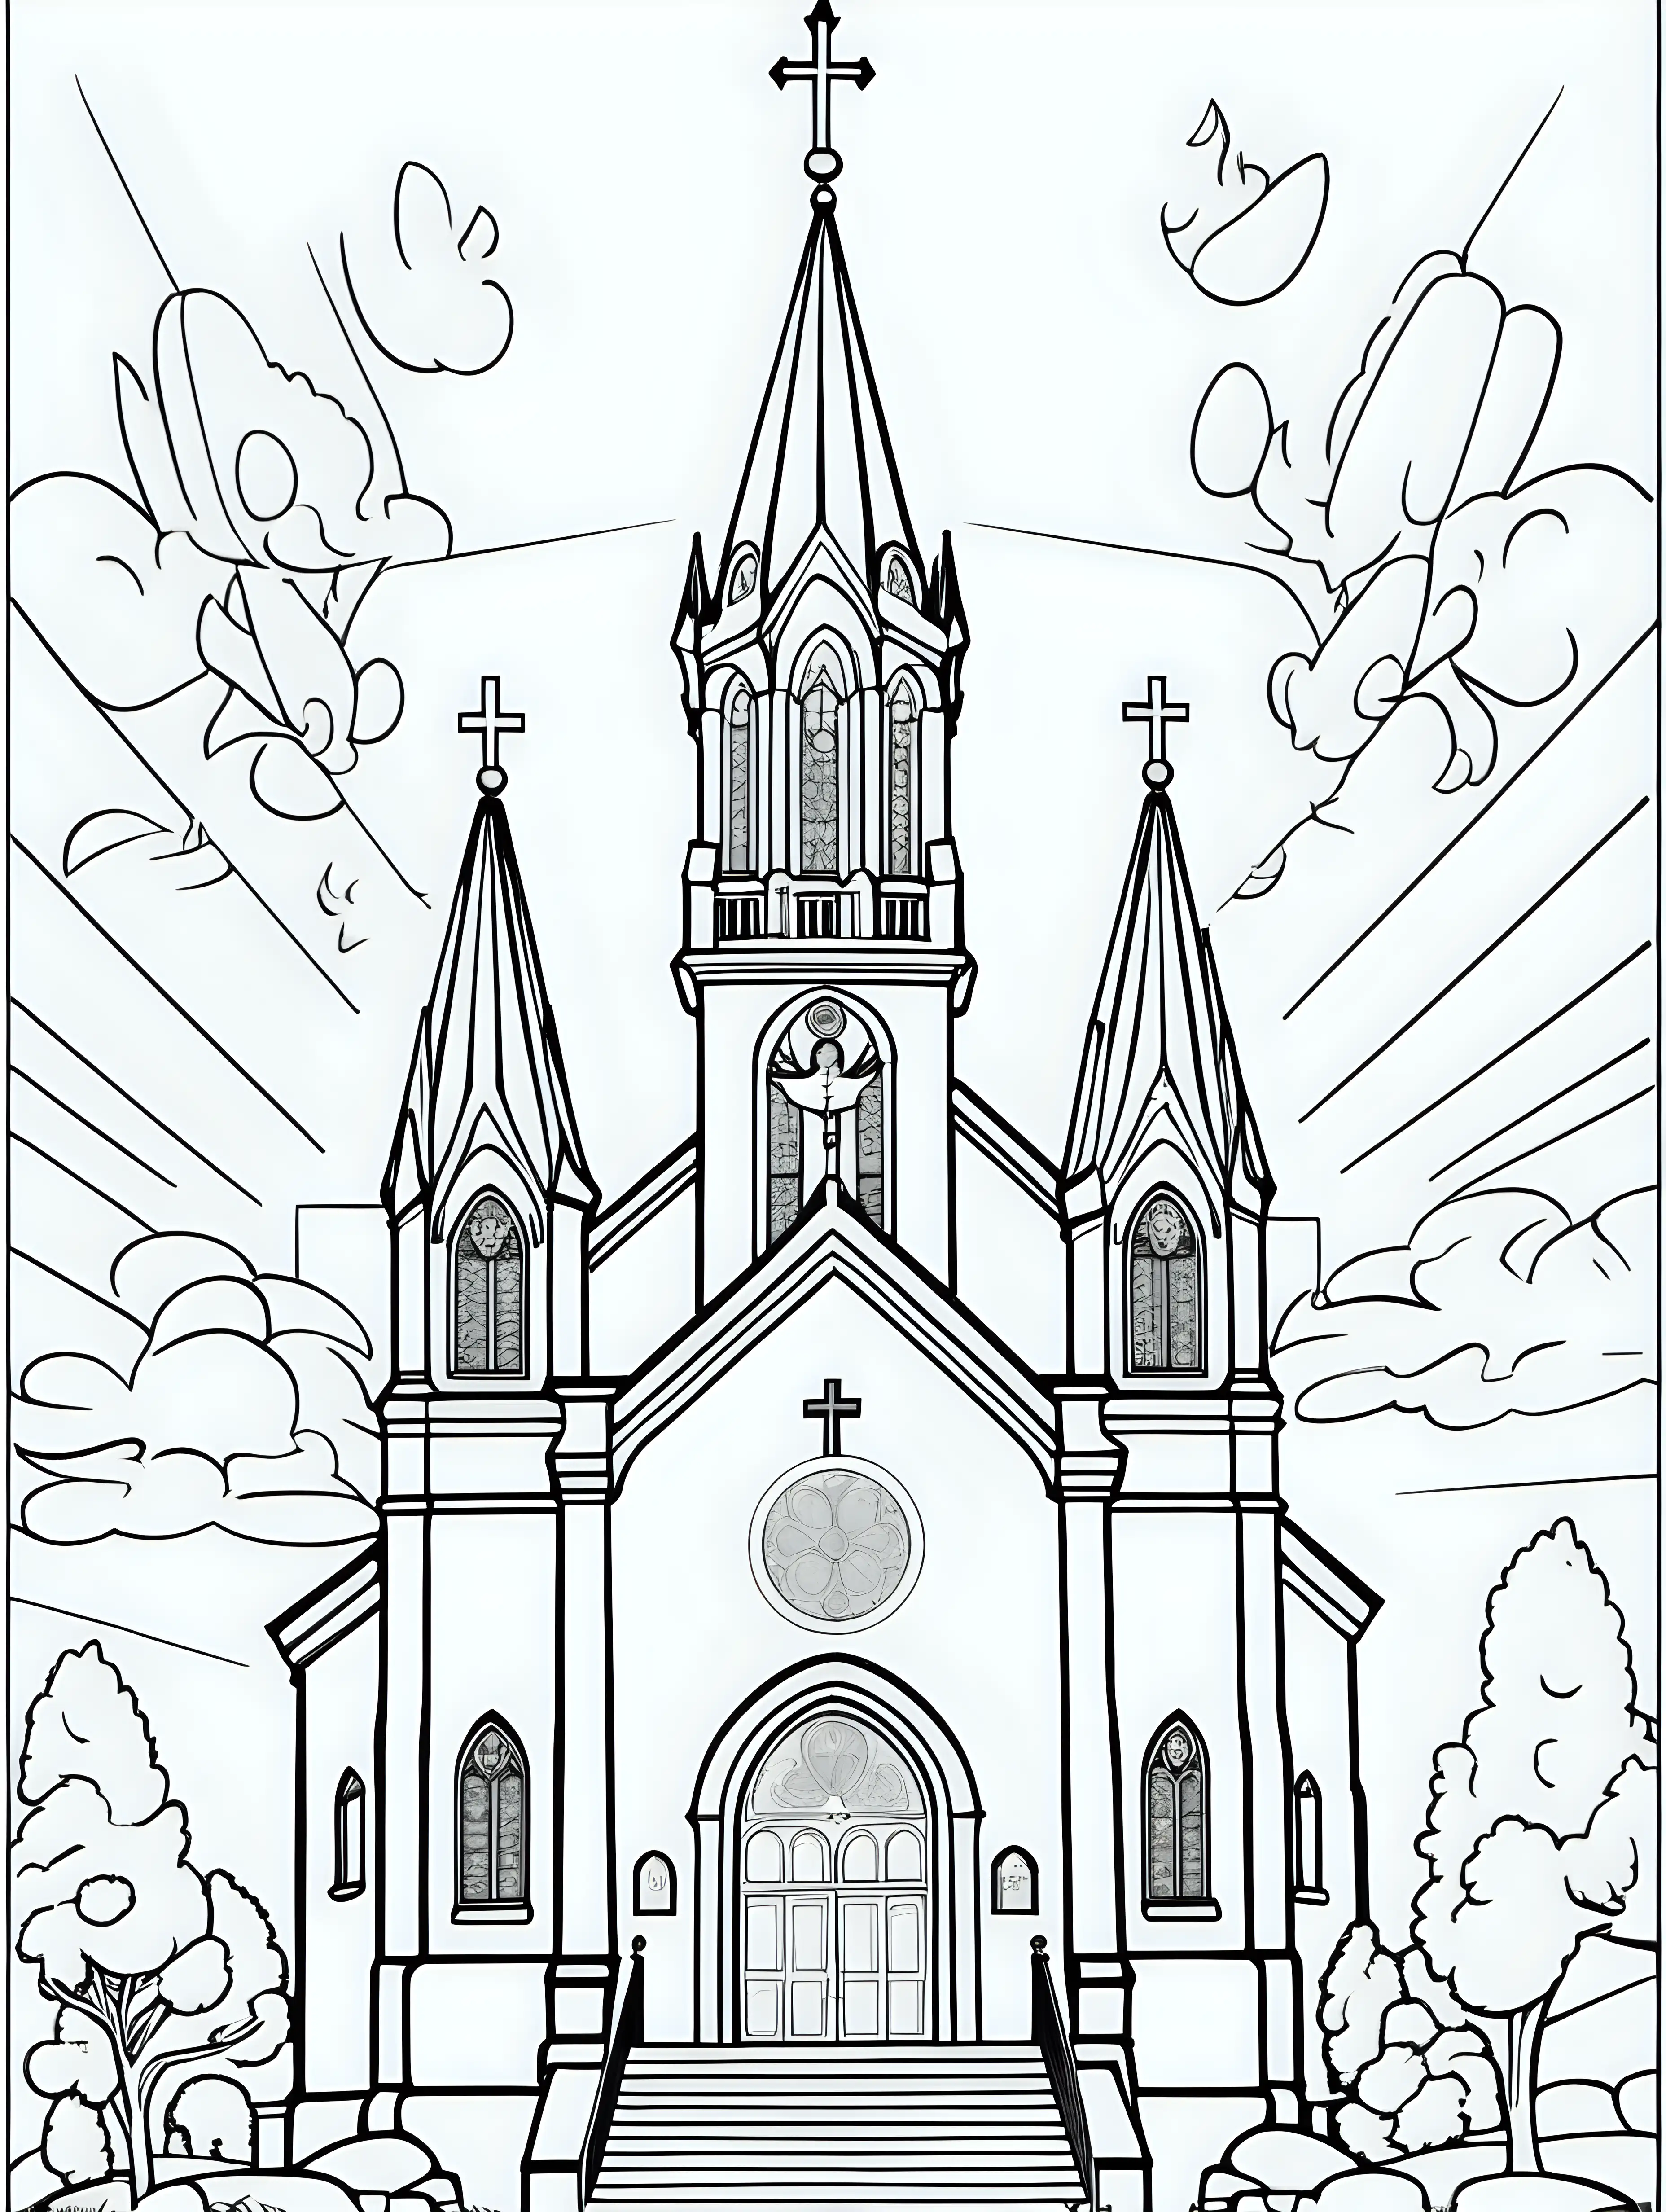 A beautiful Catholic Church, coloring page, cartoon style, thin lines, few details, no background, no shadows, no greys